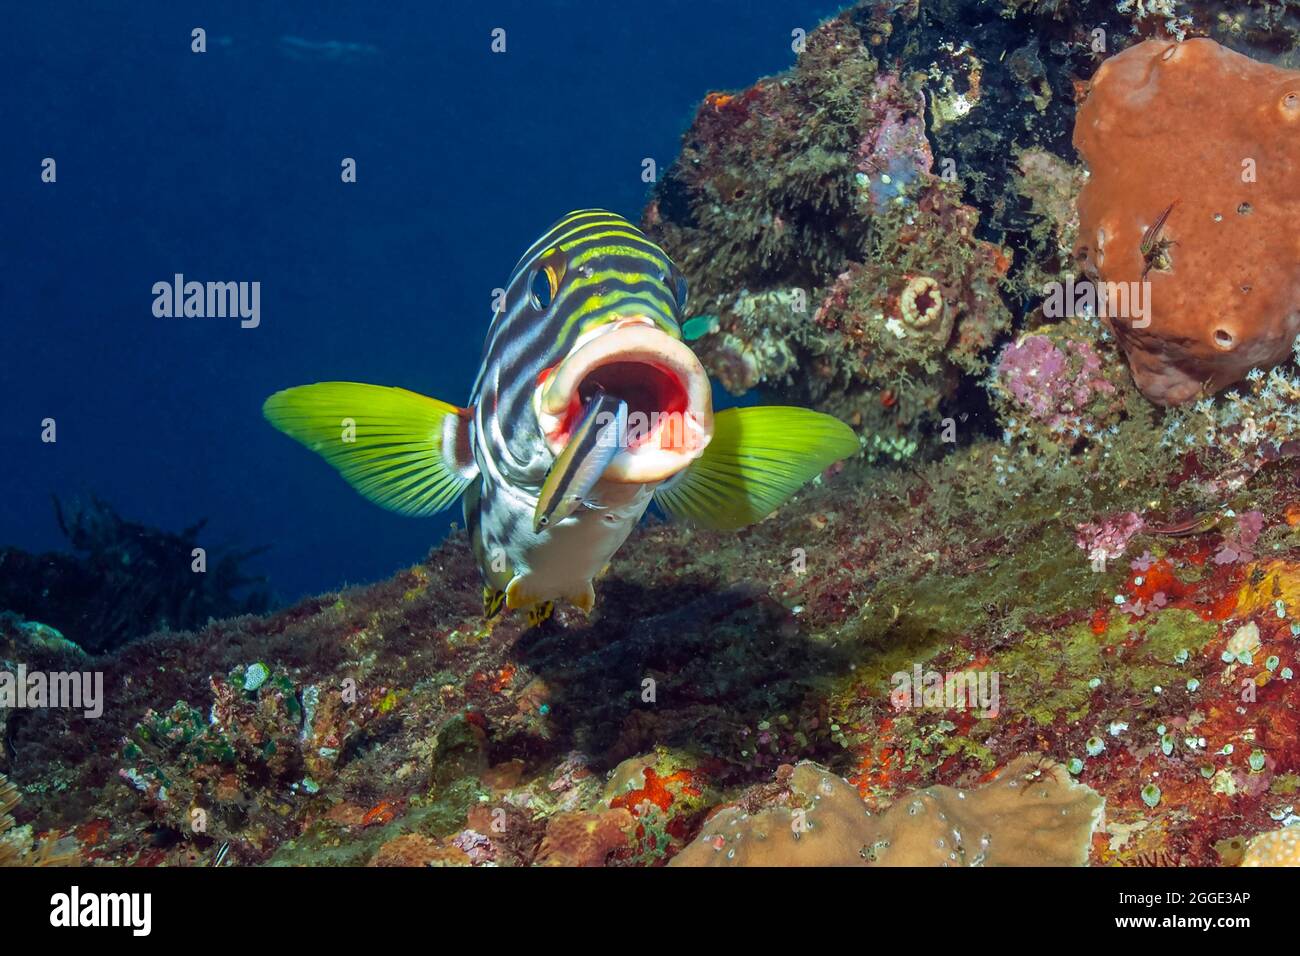 Sweetlips (Gaterin orentalis) opens mouth for Bluestreak cleaner wrasse (Labroides dimidiatus), Indian Ocean, Maldives Stock Photo